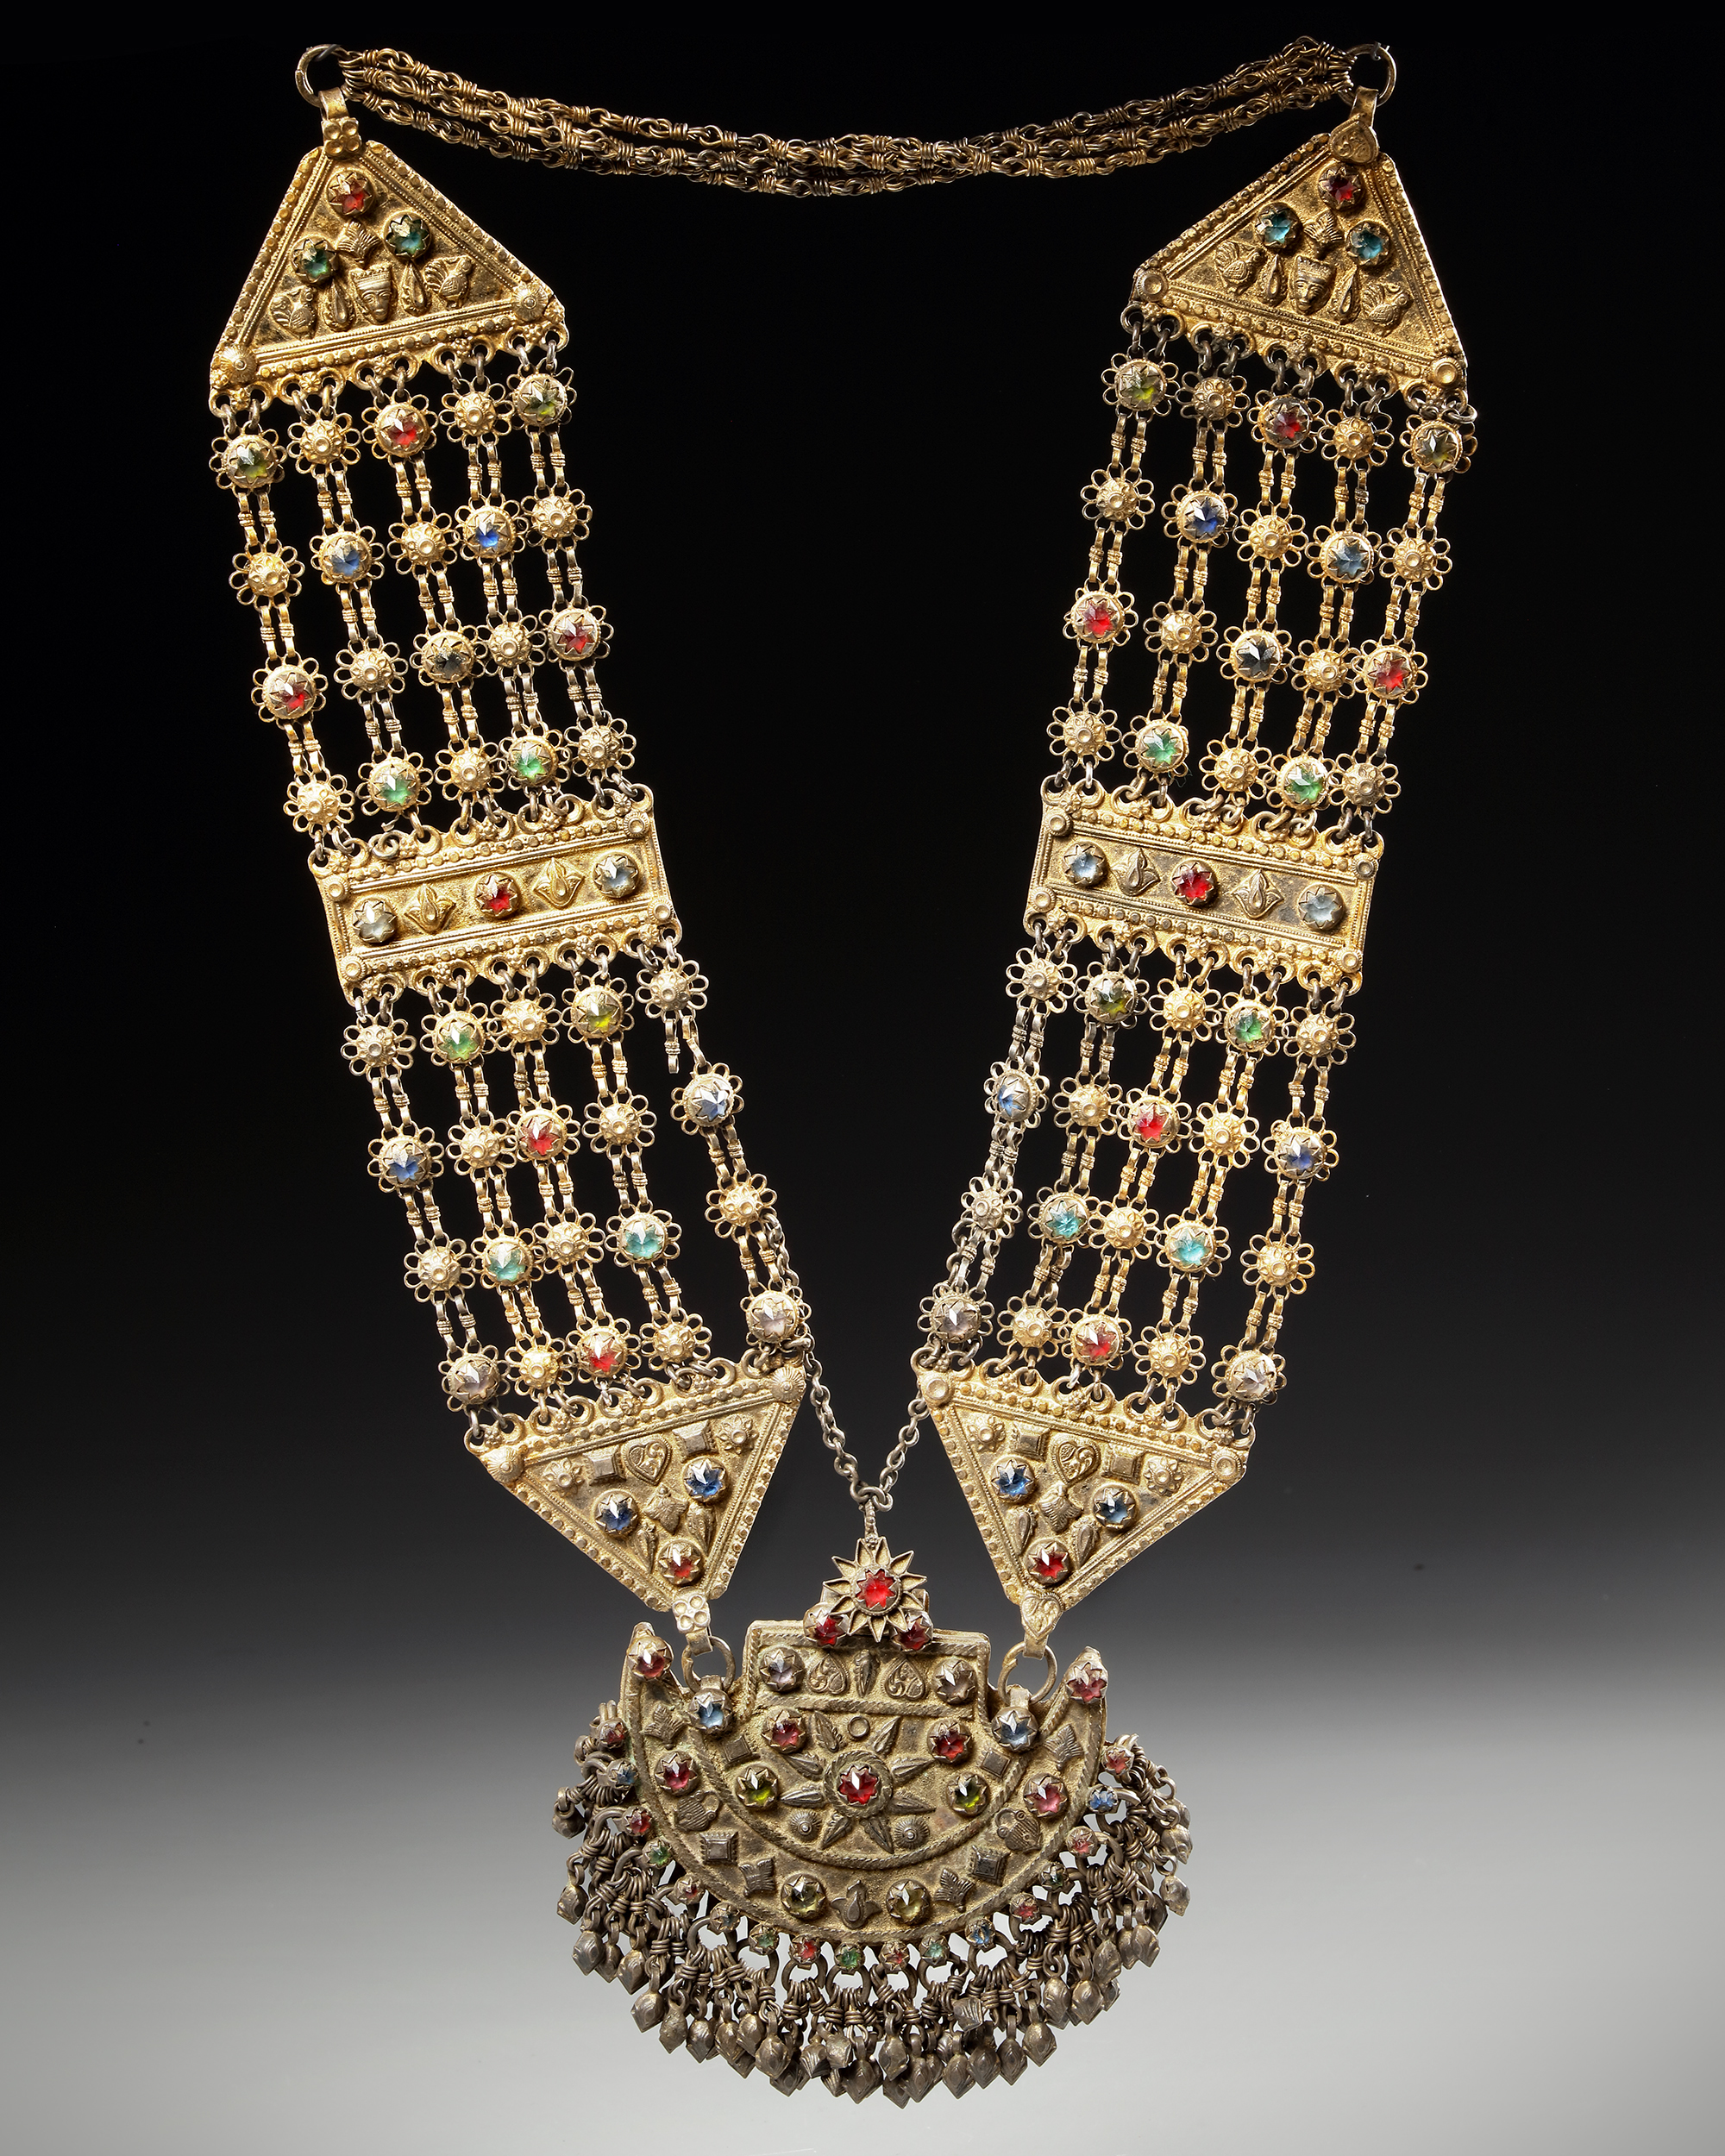 A SILVER NECKLACE, NEPAL, 19TH CENTURY